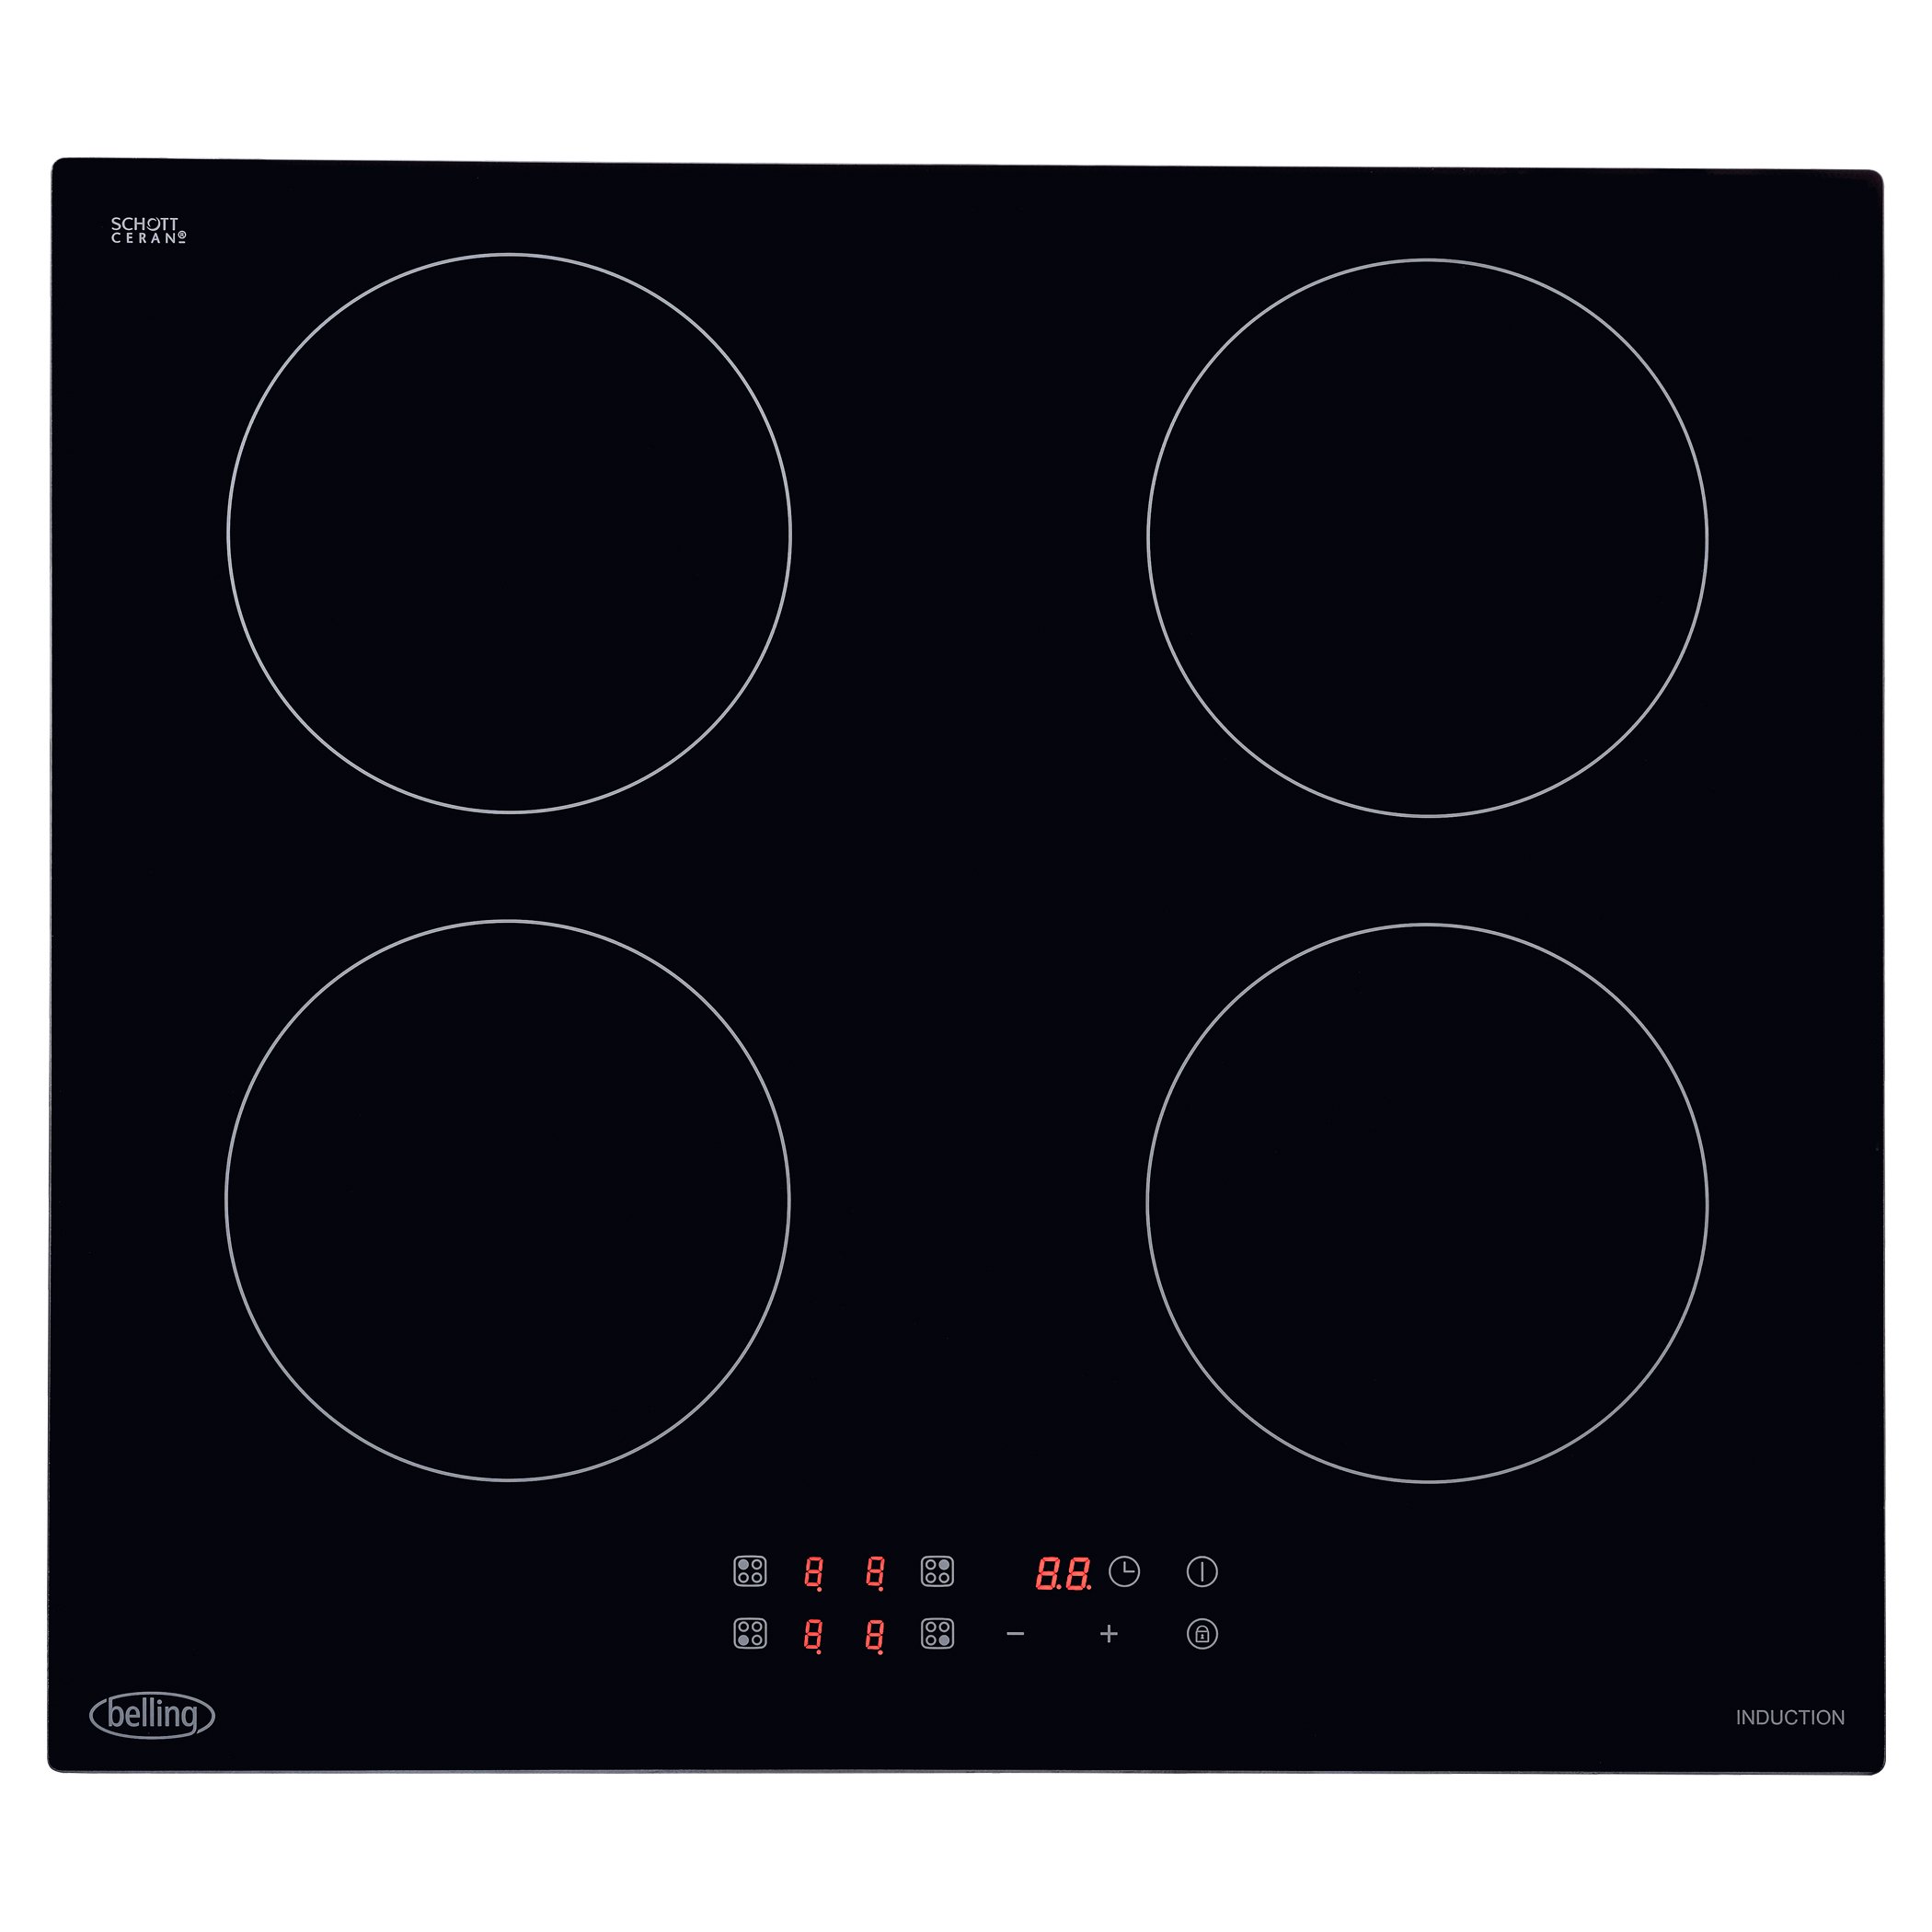 13amp 60cm touch control induction hob with nine power levels and hob timer. Additional features include residual heat indicator and child lock.